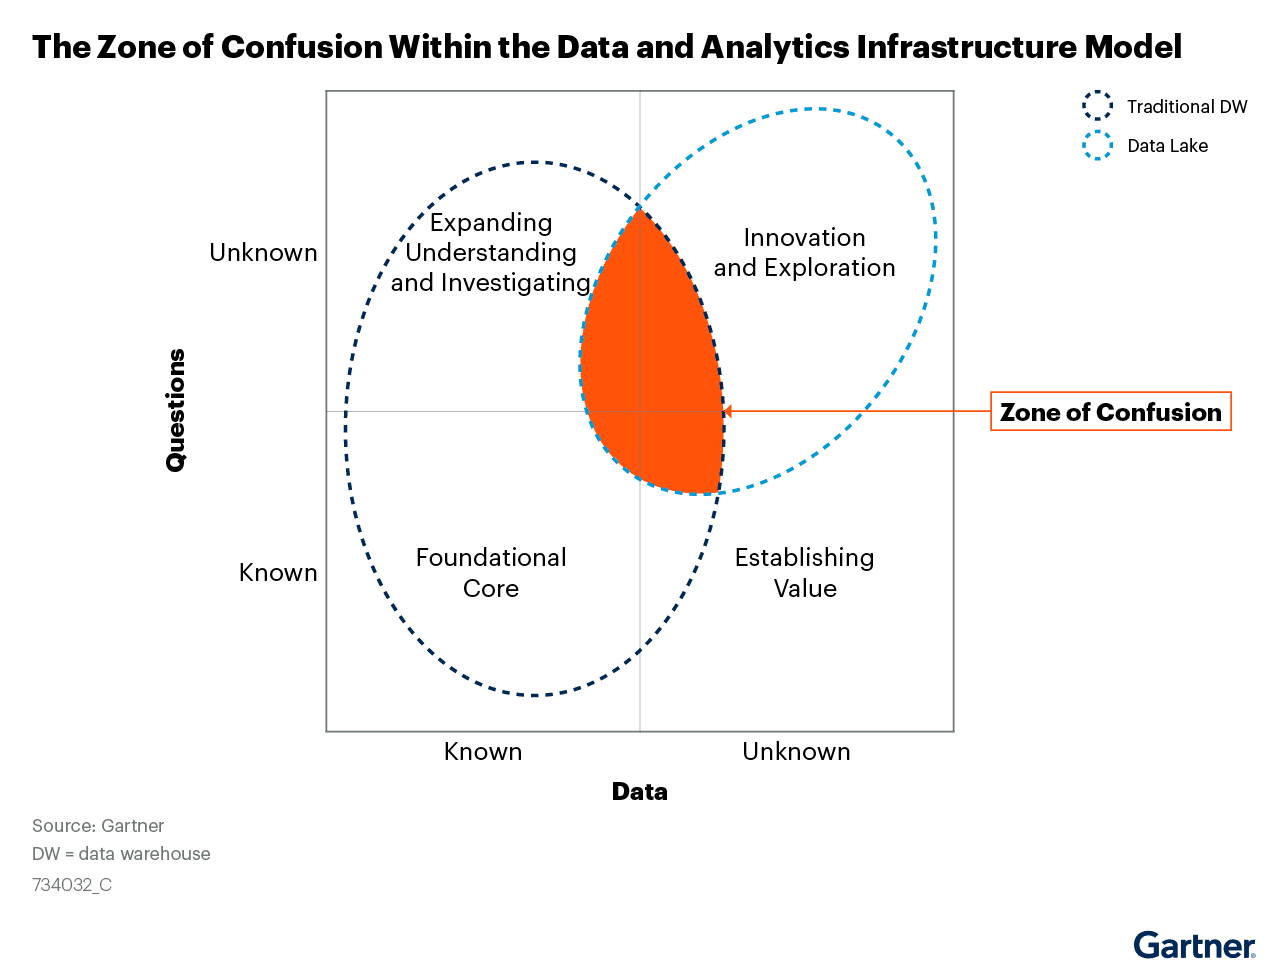 The Zone of Confusion Data Analytics Infrastructure